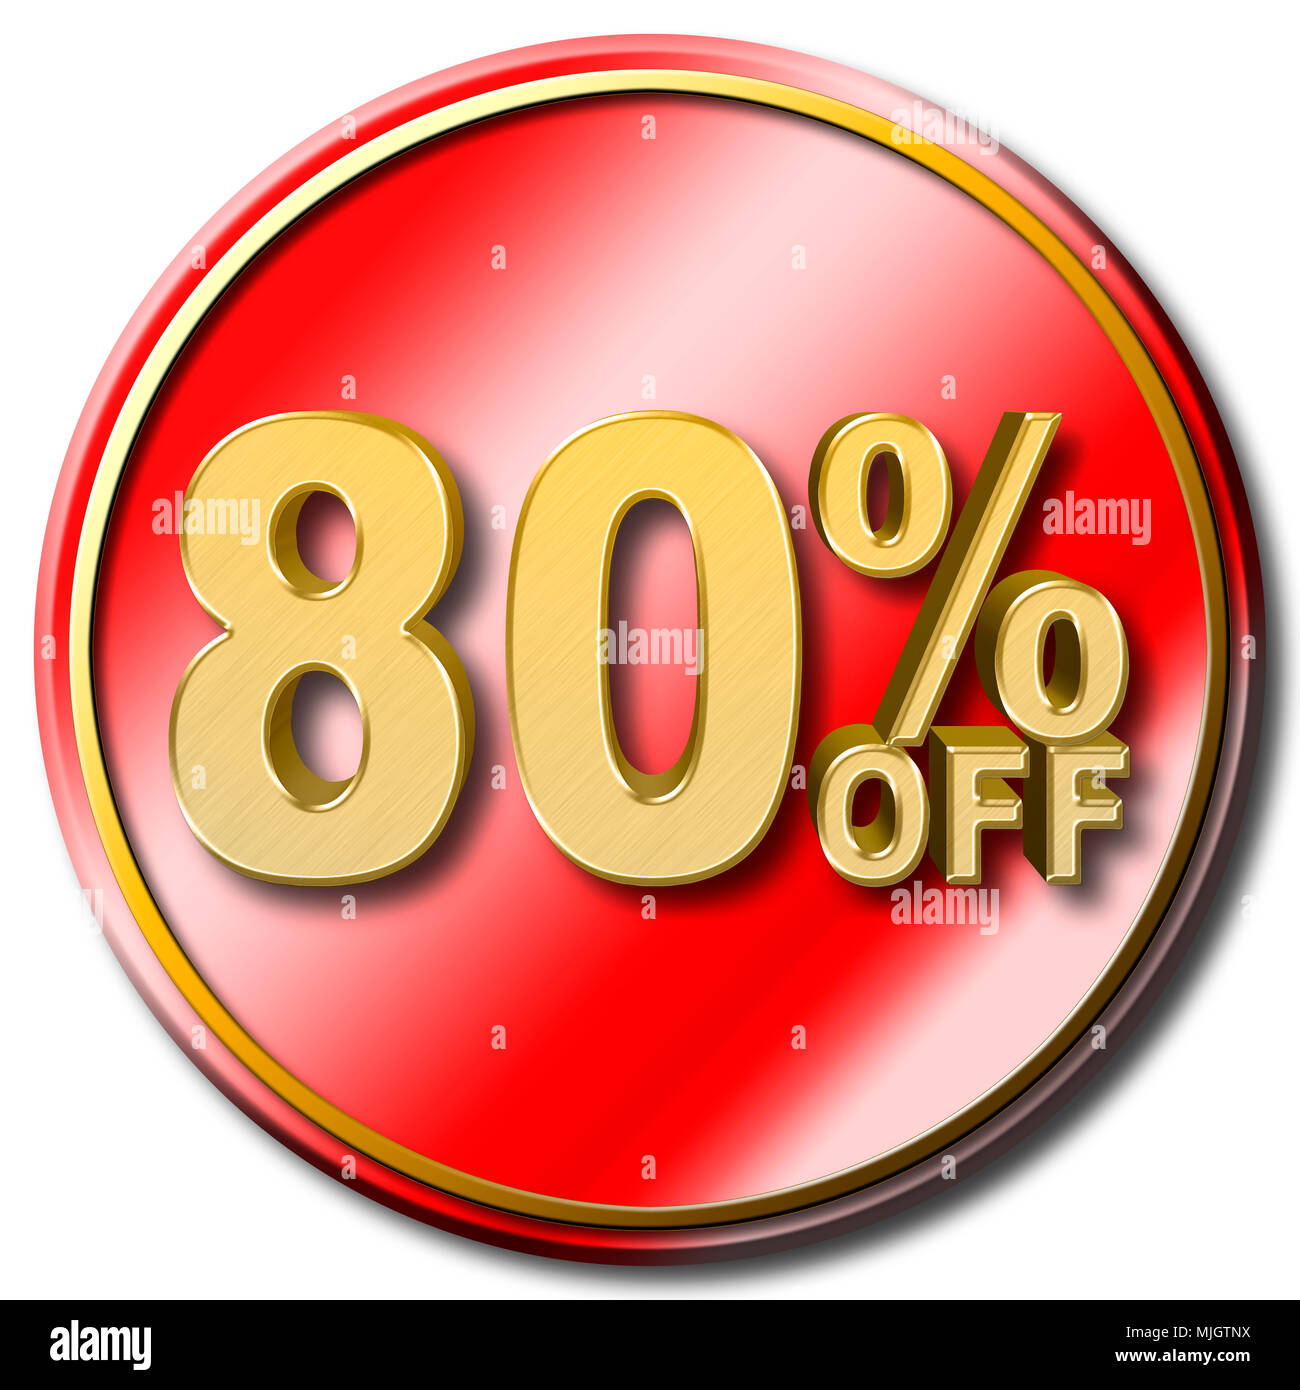 Stock Illustration - Large Golden Text: 80 Percent Off, Sale, Golden Numbers, 3D Illustration, White Background. Stock Photo